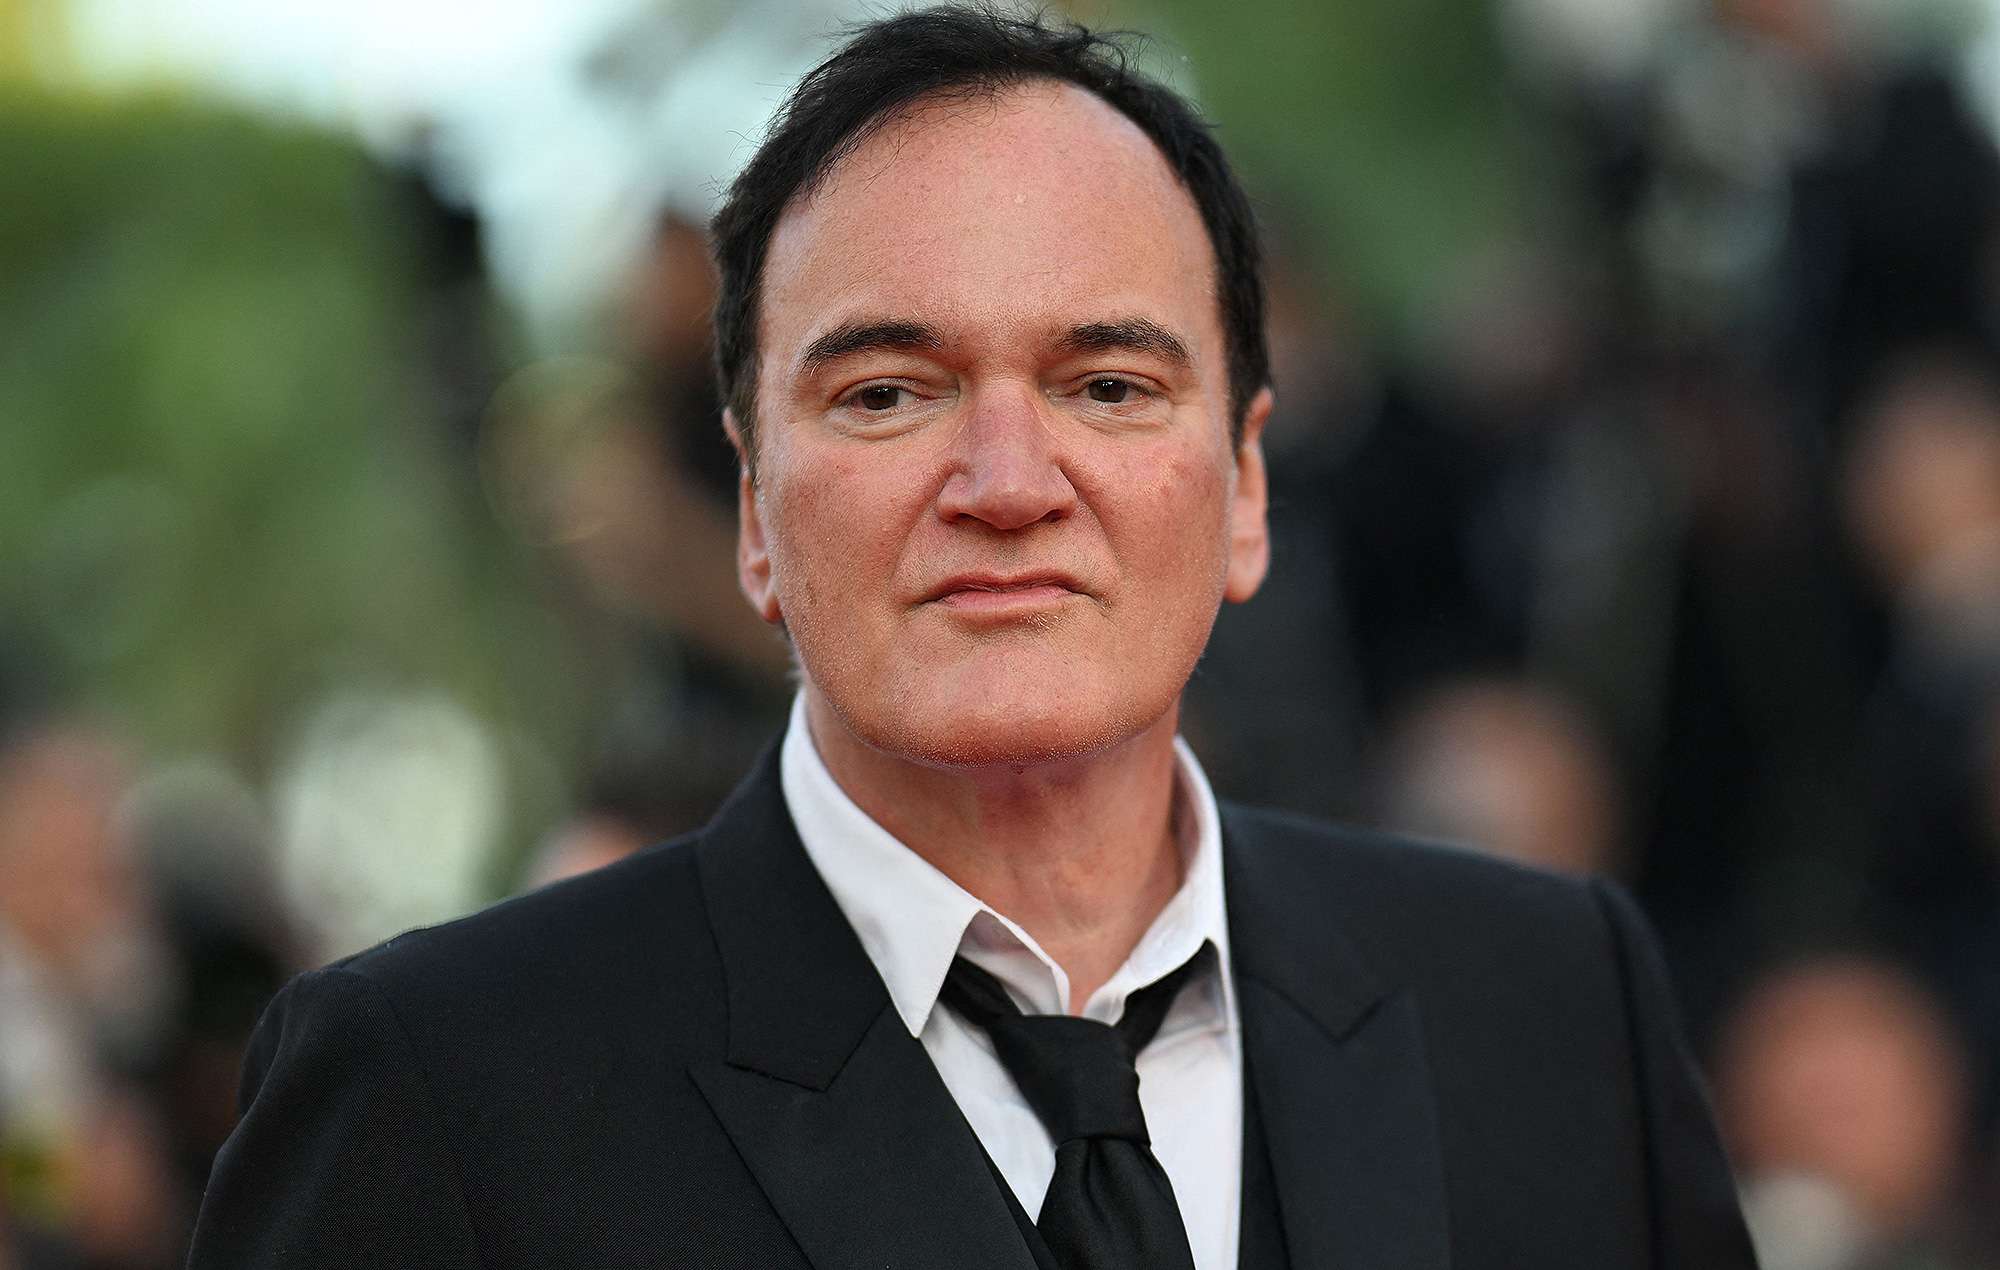 Siblings: Who Are Quentin Tarantino Brother And Sisters? Find Out About ...